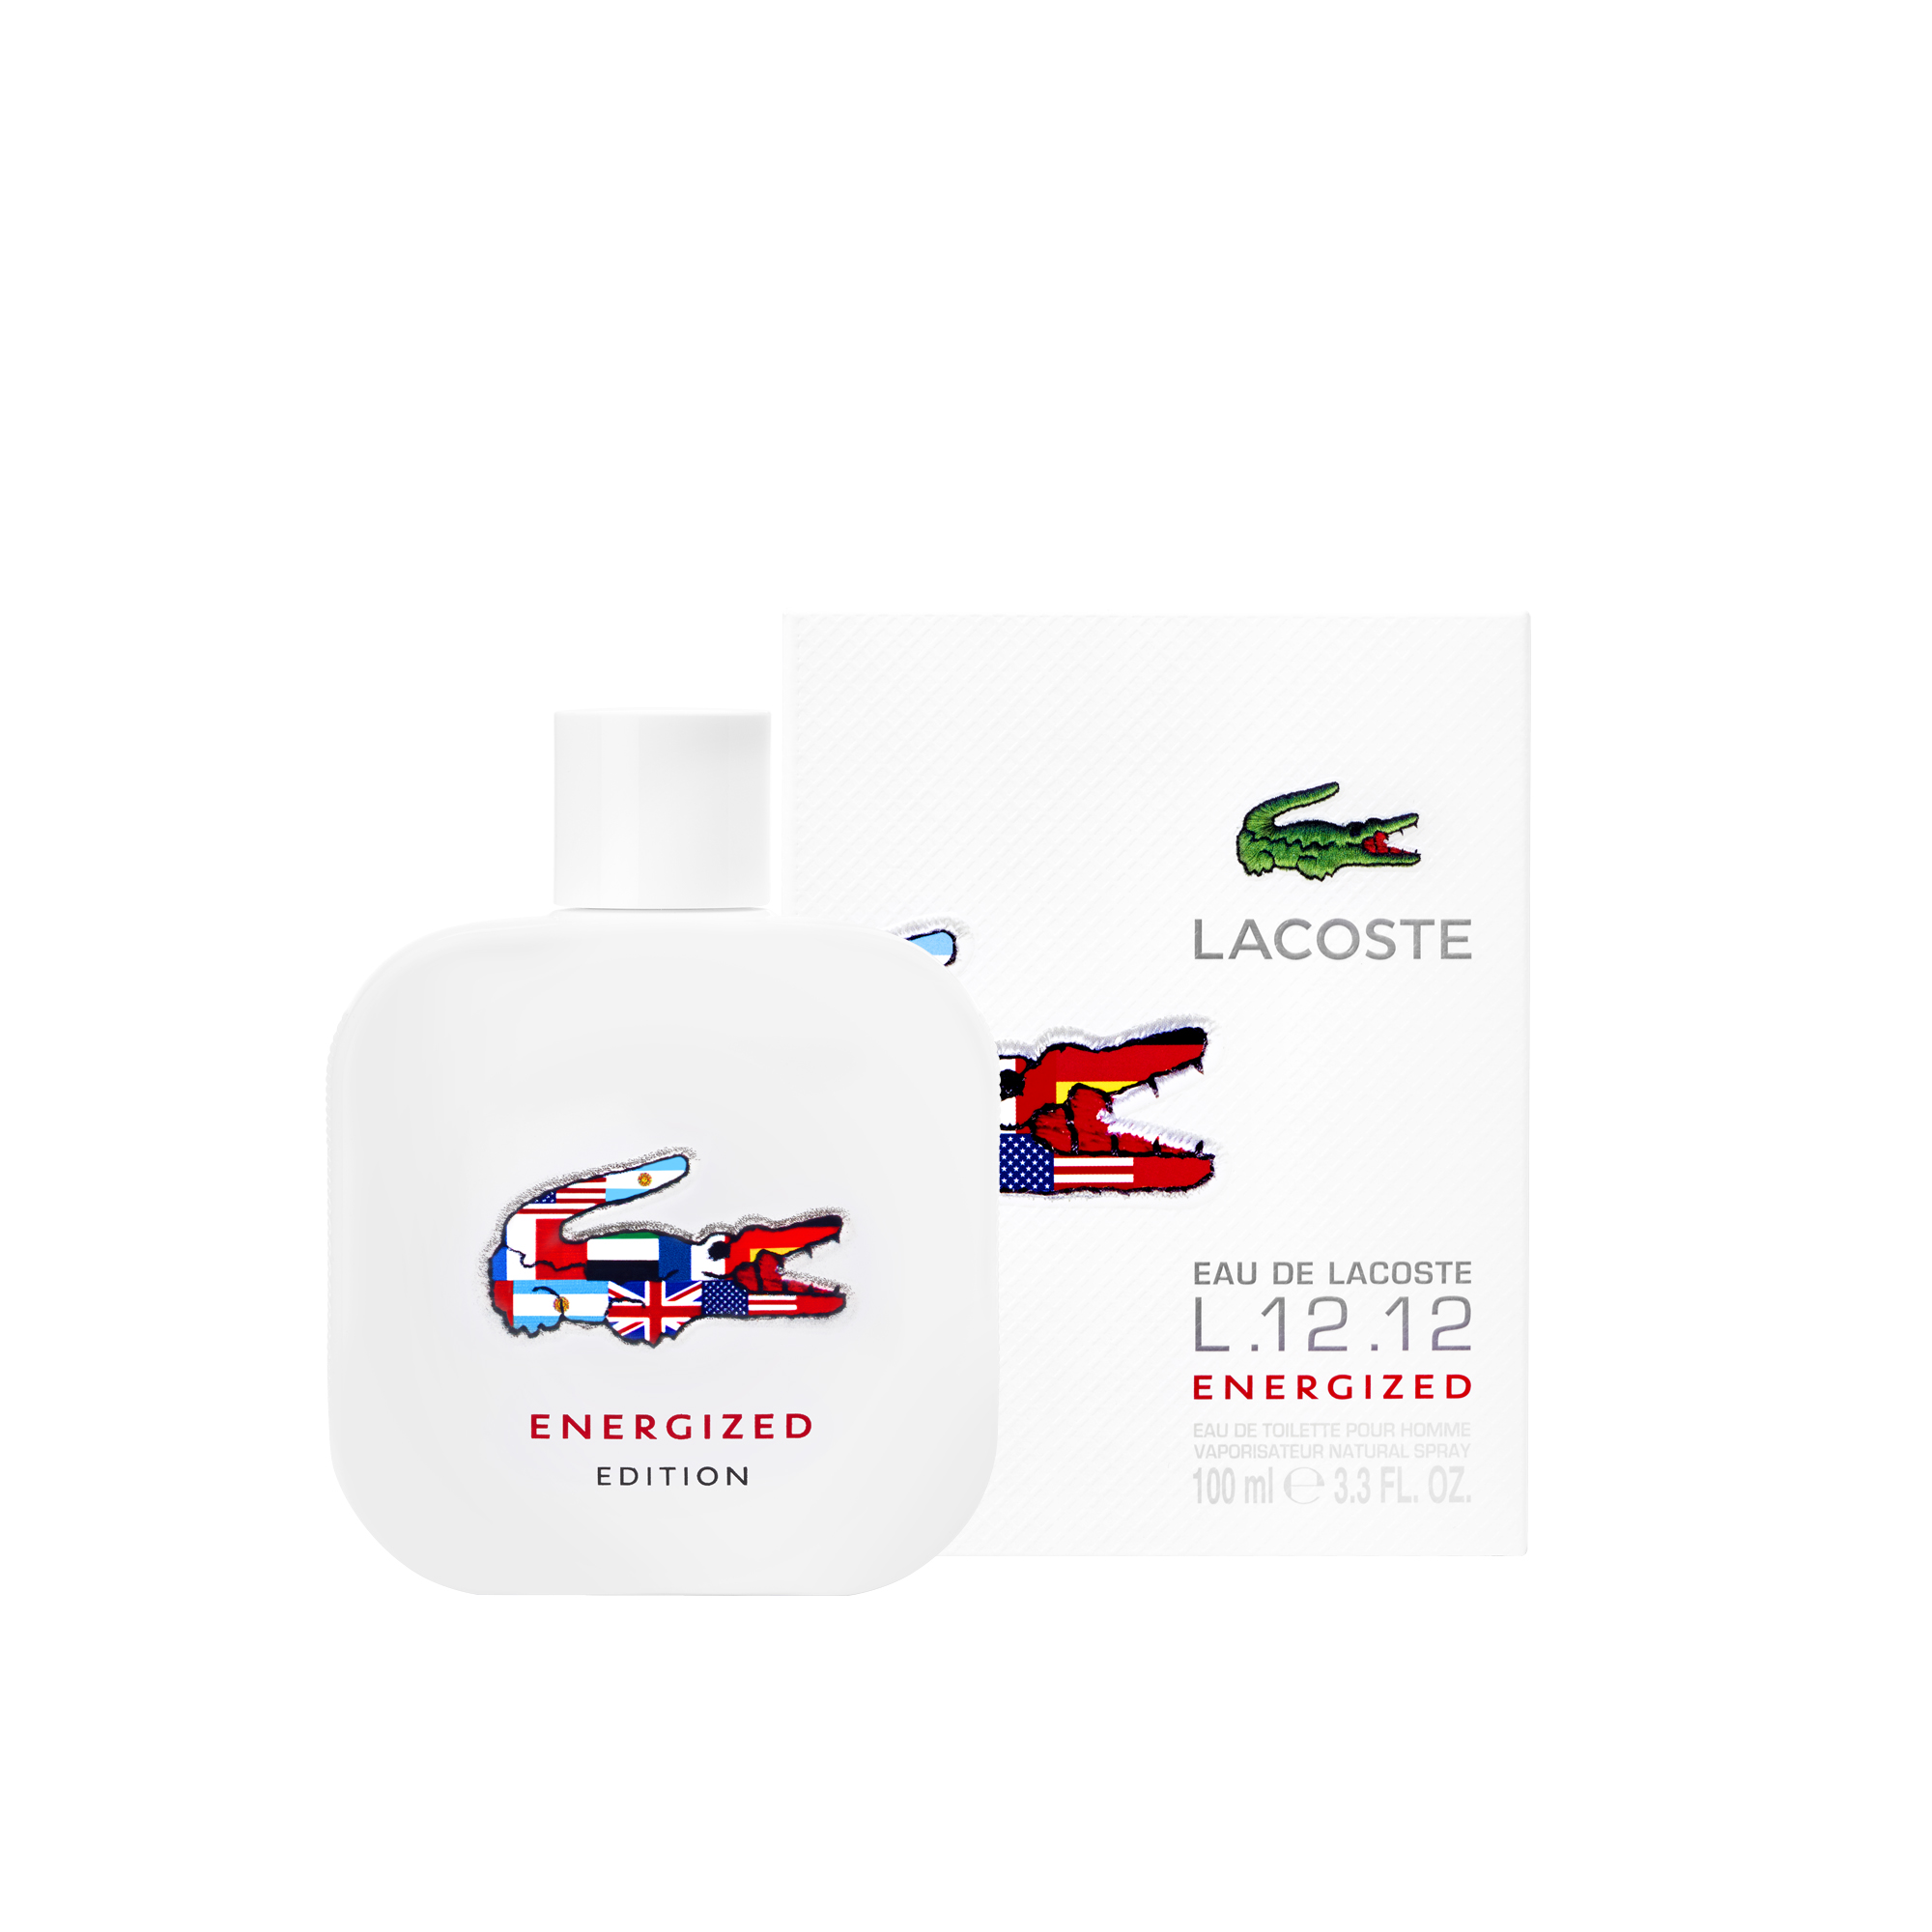 lacoste energized review